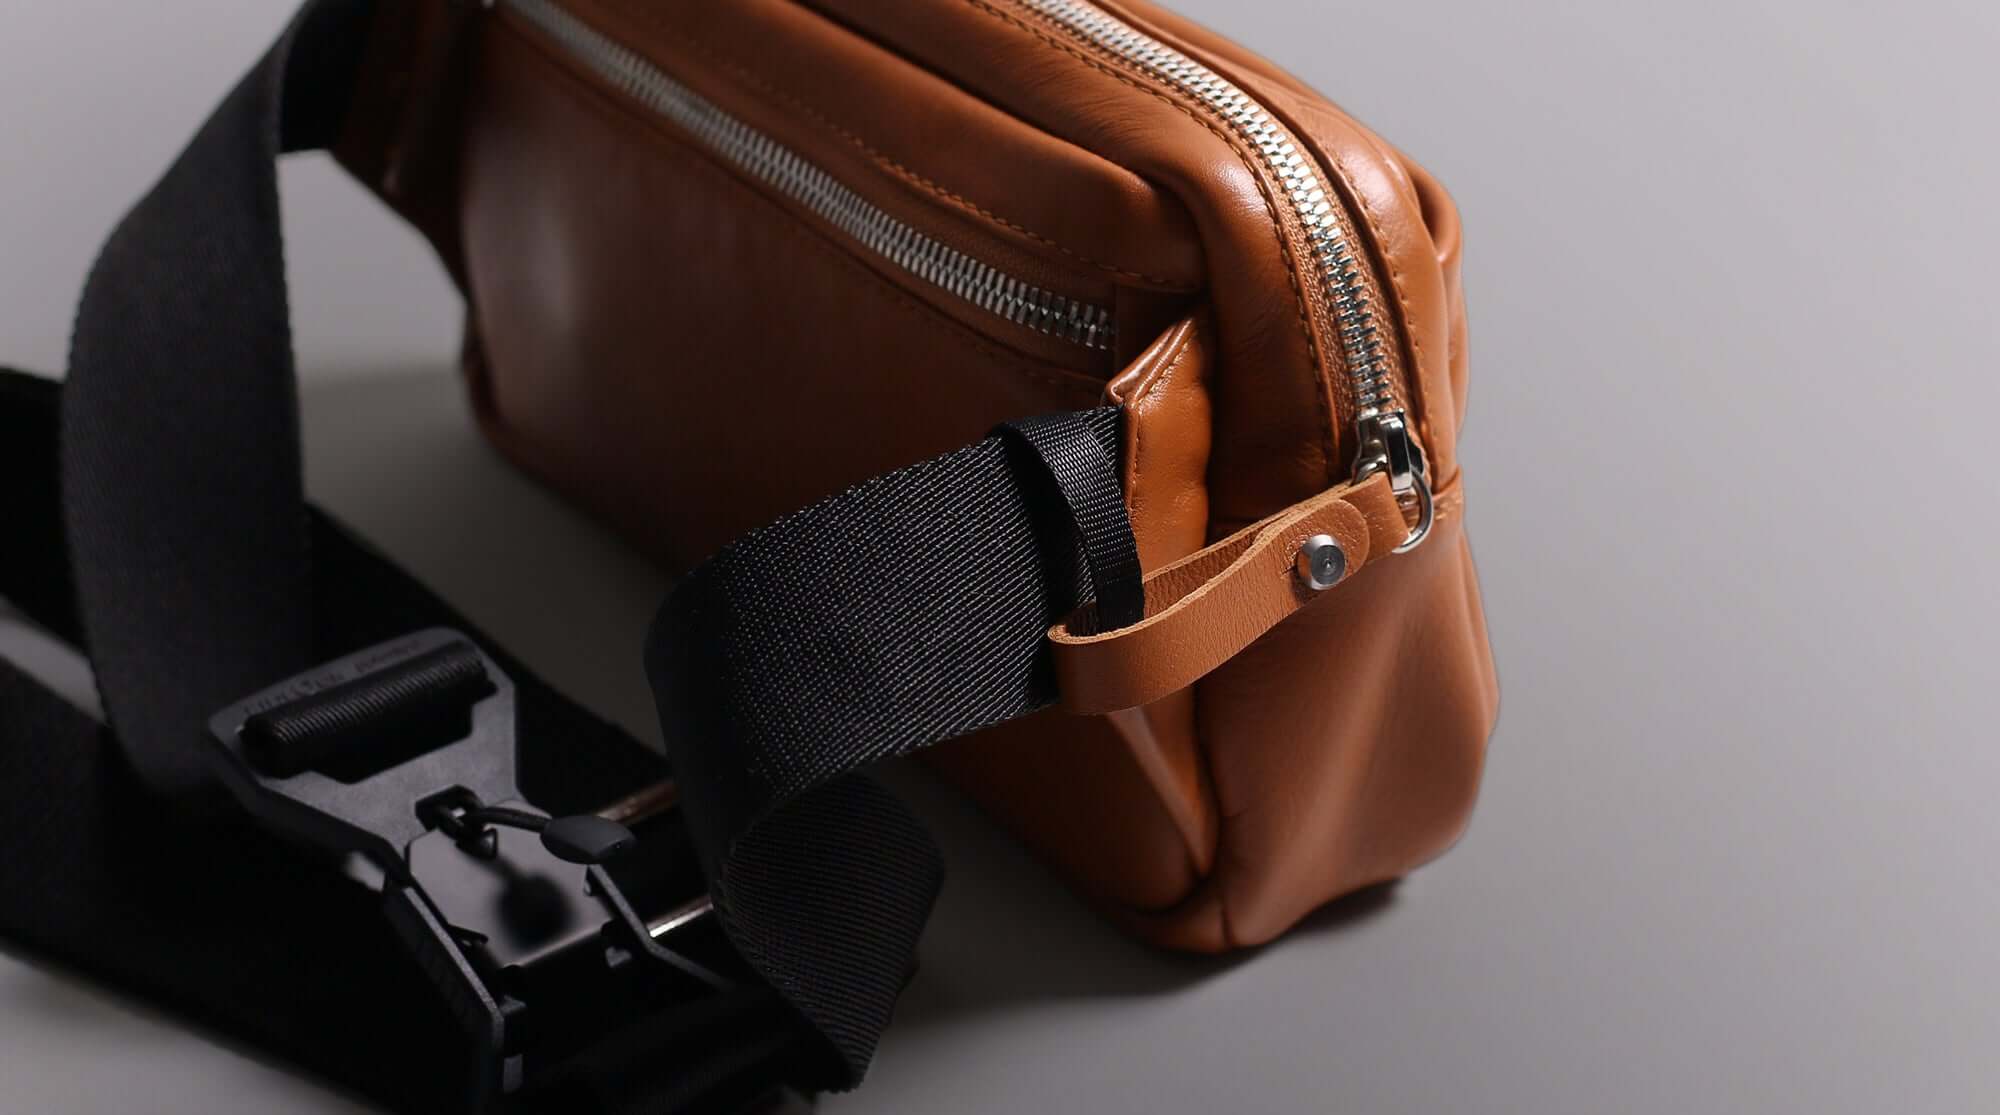 Handcrafted leather sling bag with security pull tab